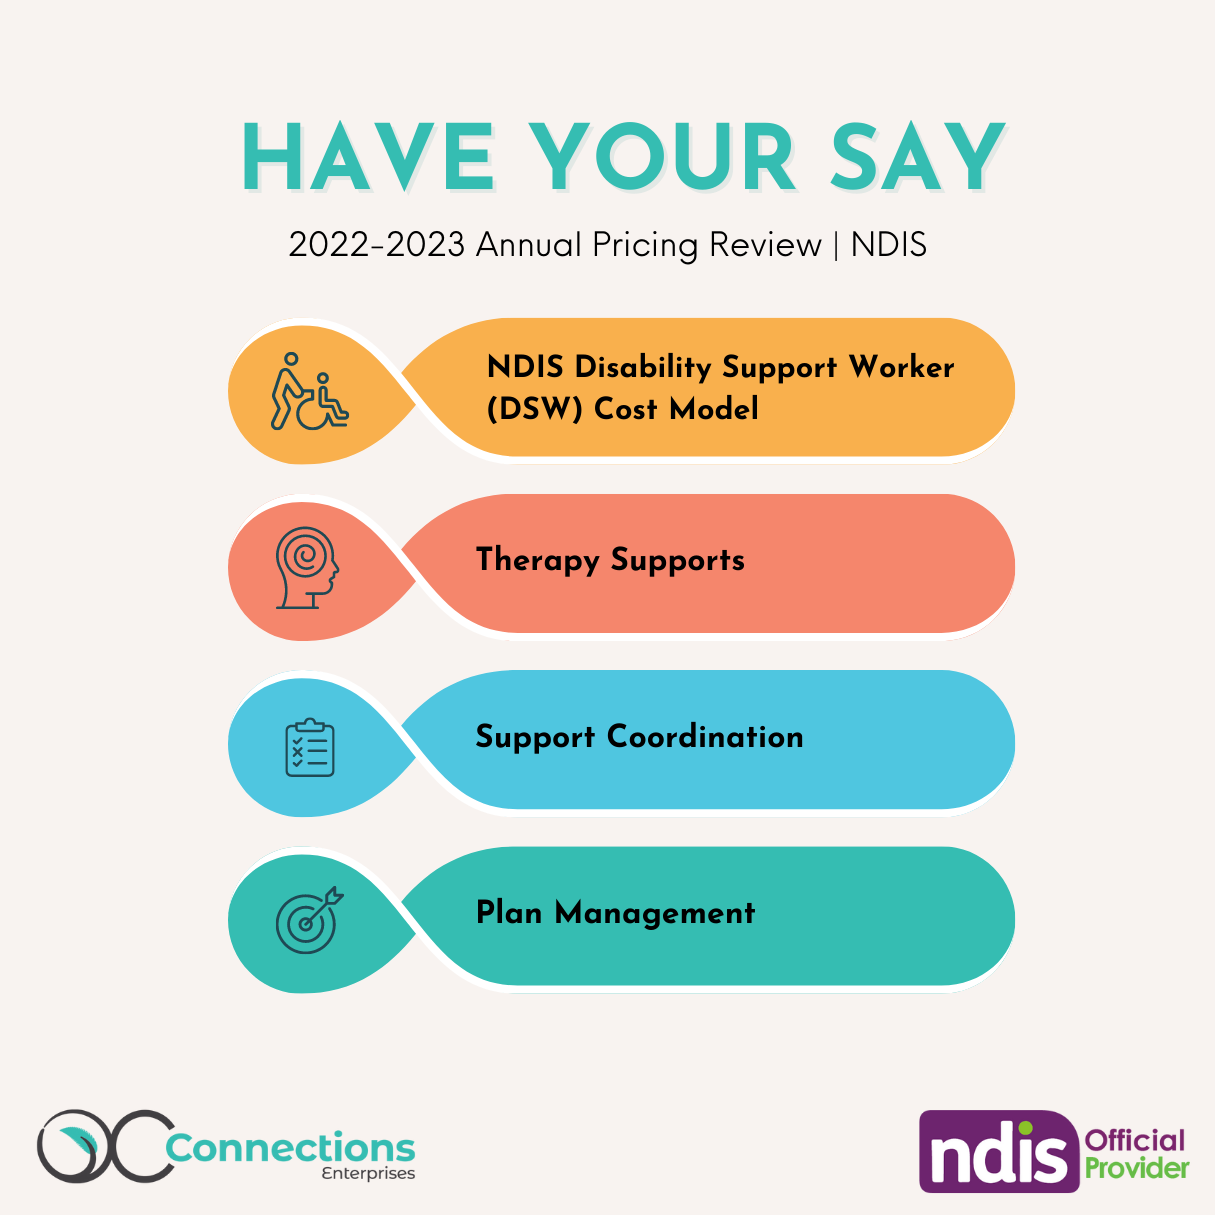 HAVE YOUR SAY – NDIA’S 2022-2023 ANNUAL PRICING REVIEW